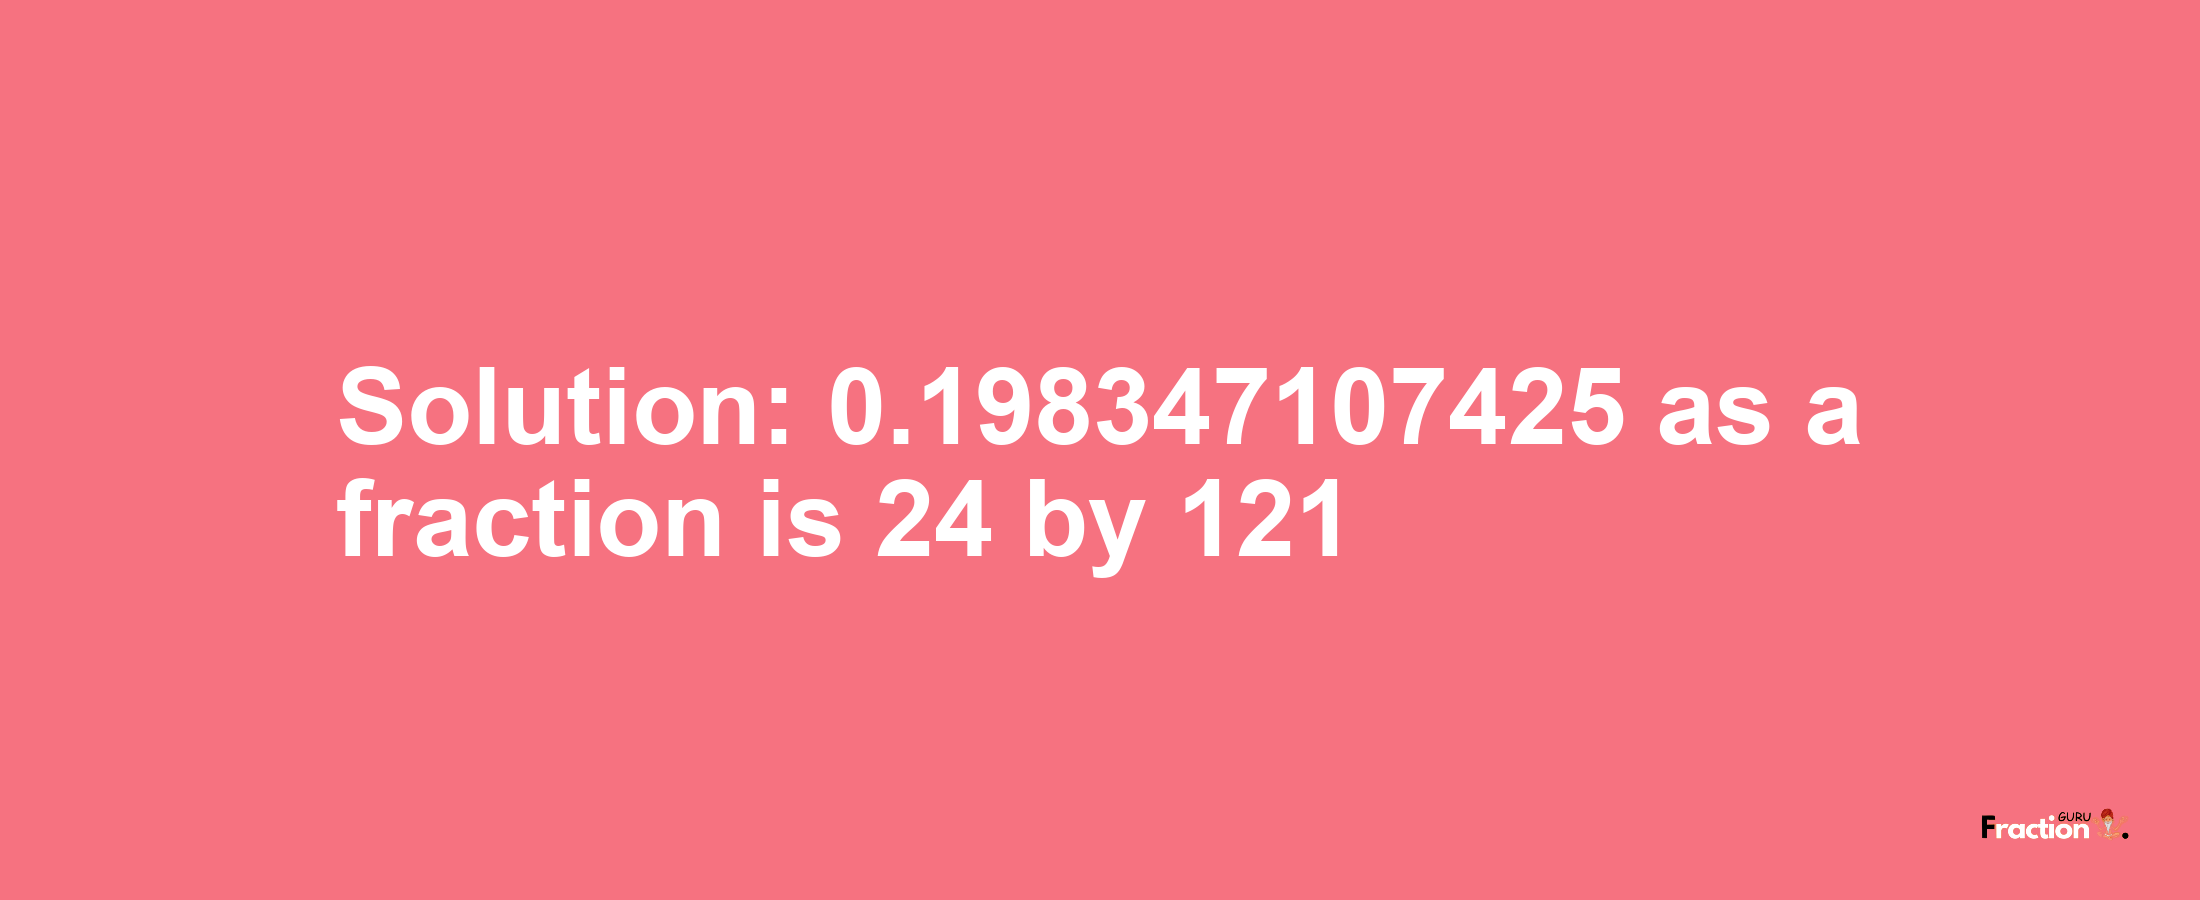 Solution:0.198347107425 as a fraction is 24/121